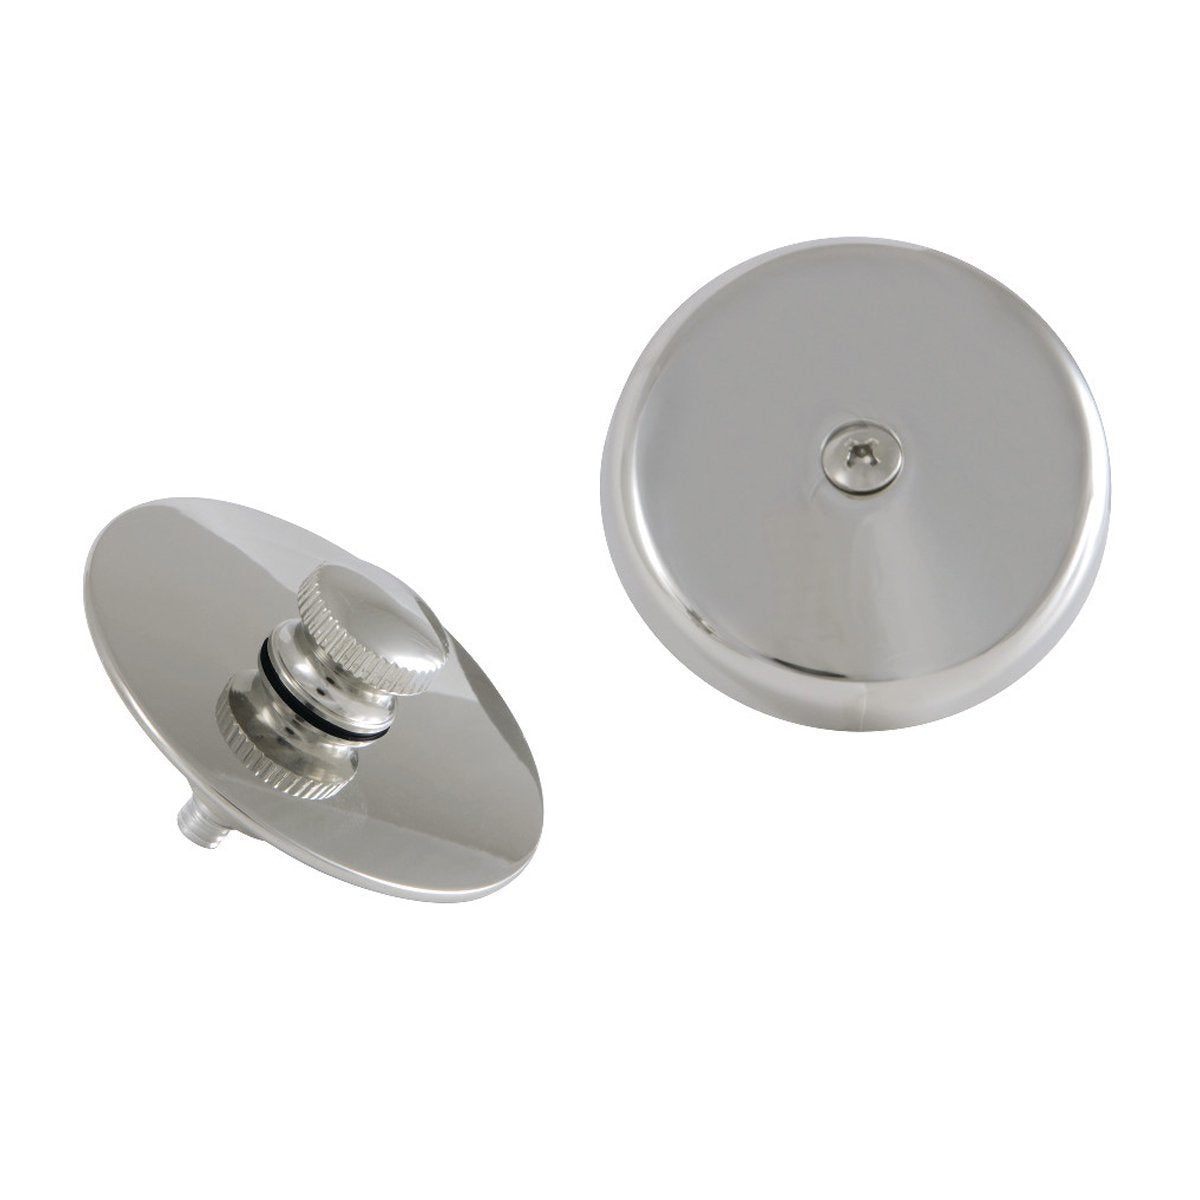 Kingston Brass Tub Drain Stopper with Overflow Plate Replacement Trim Kit